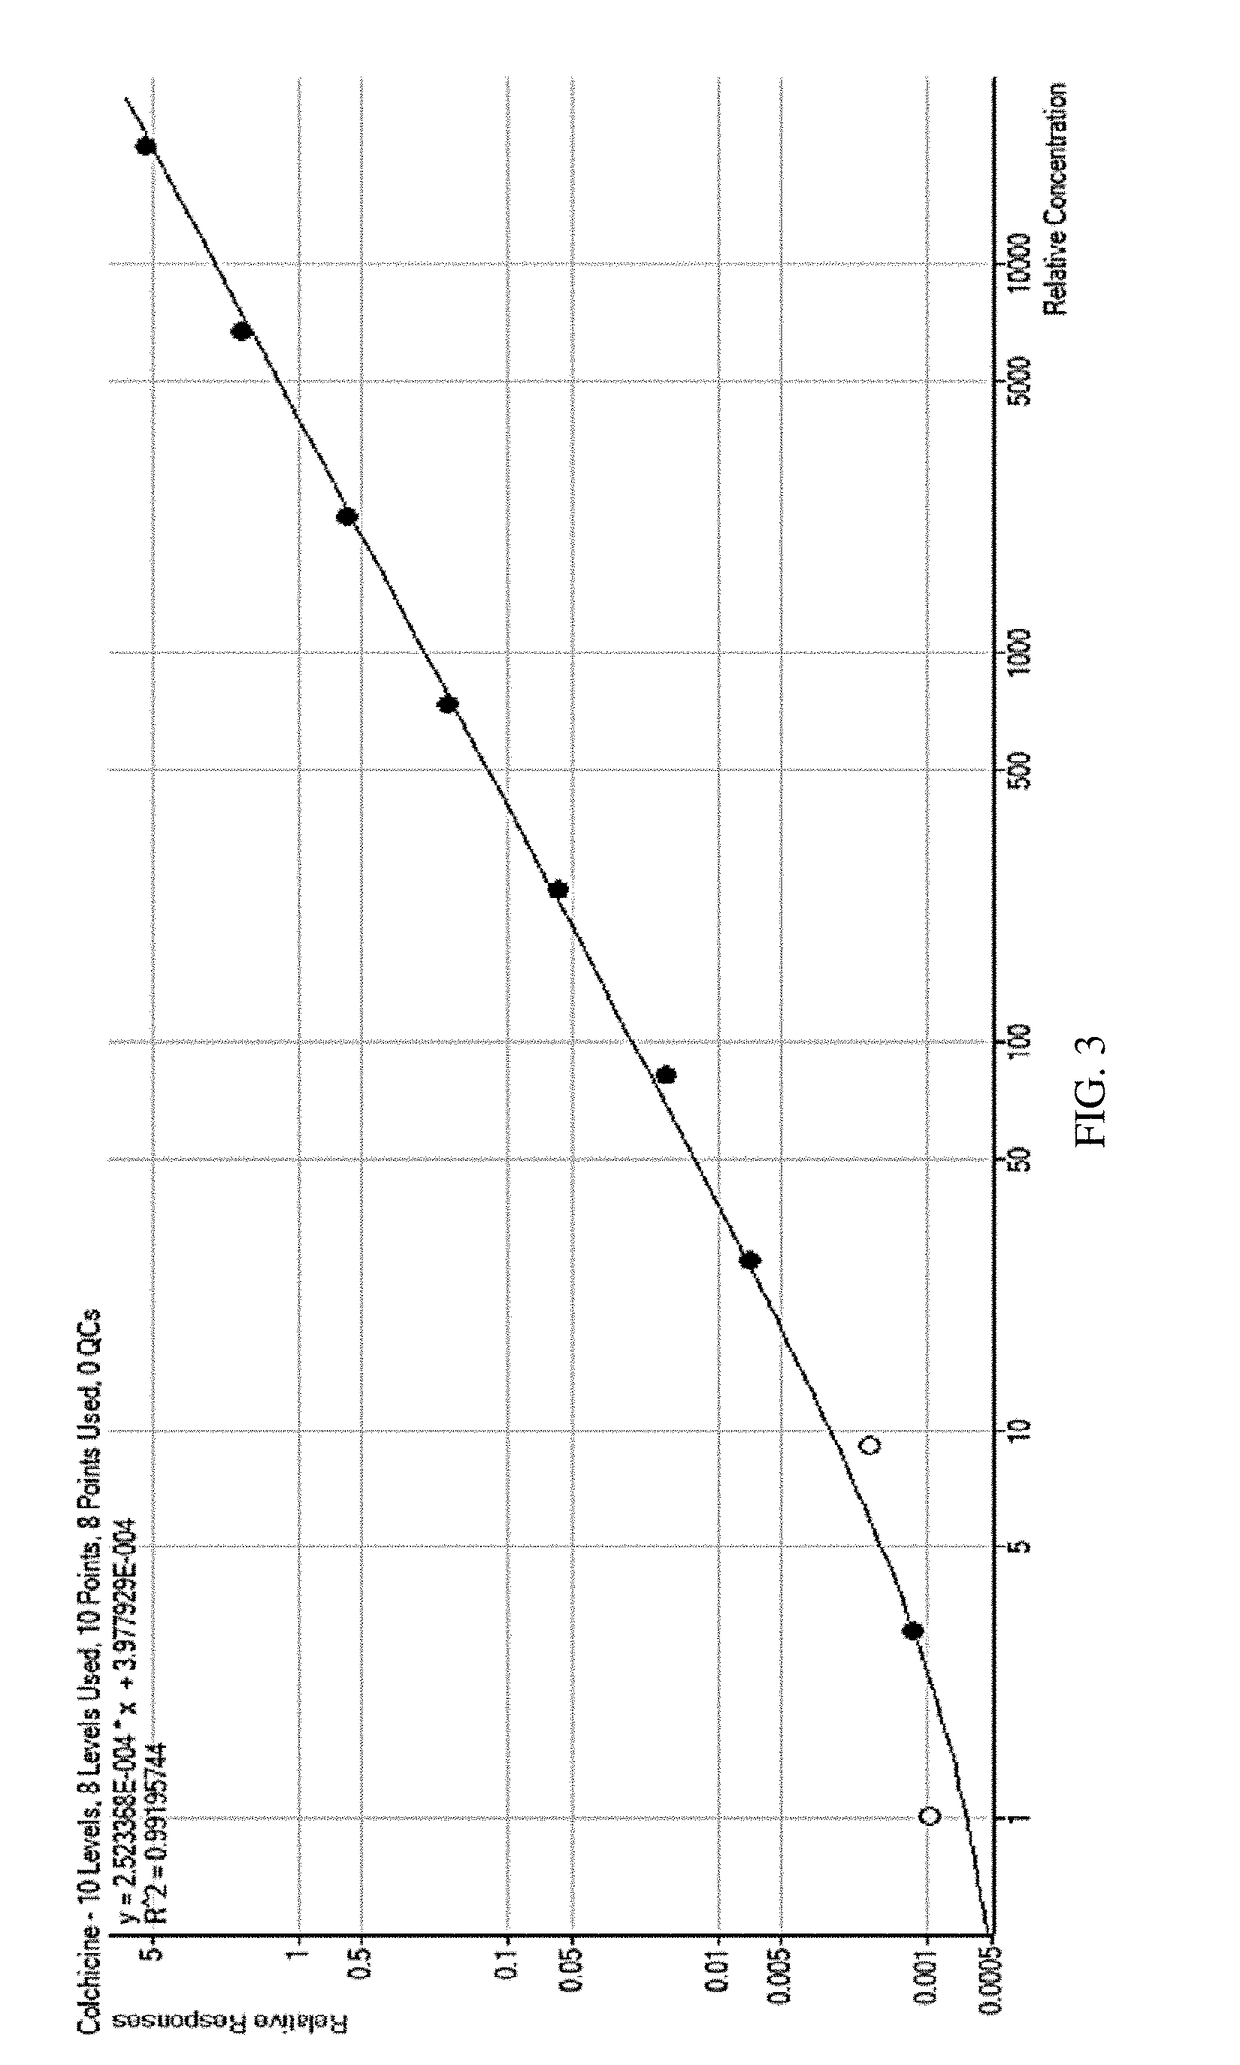 Composition and method of use of colchicine oral liquid